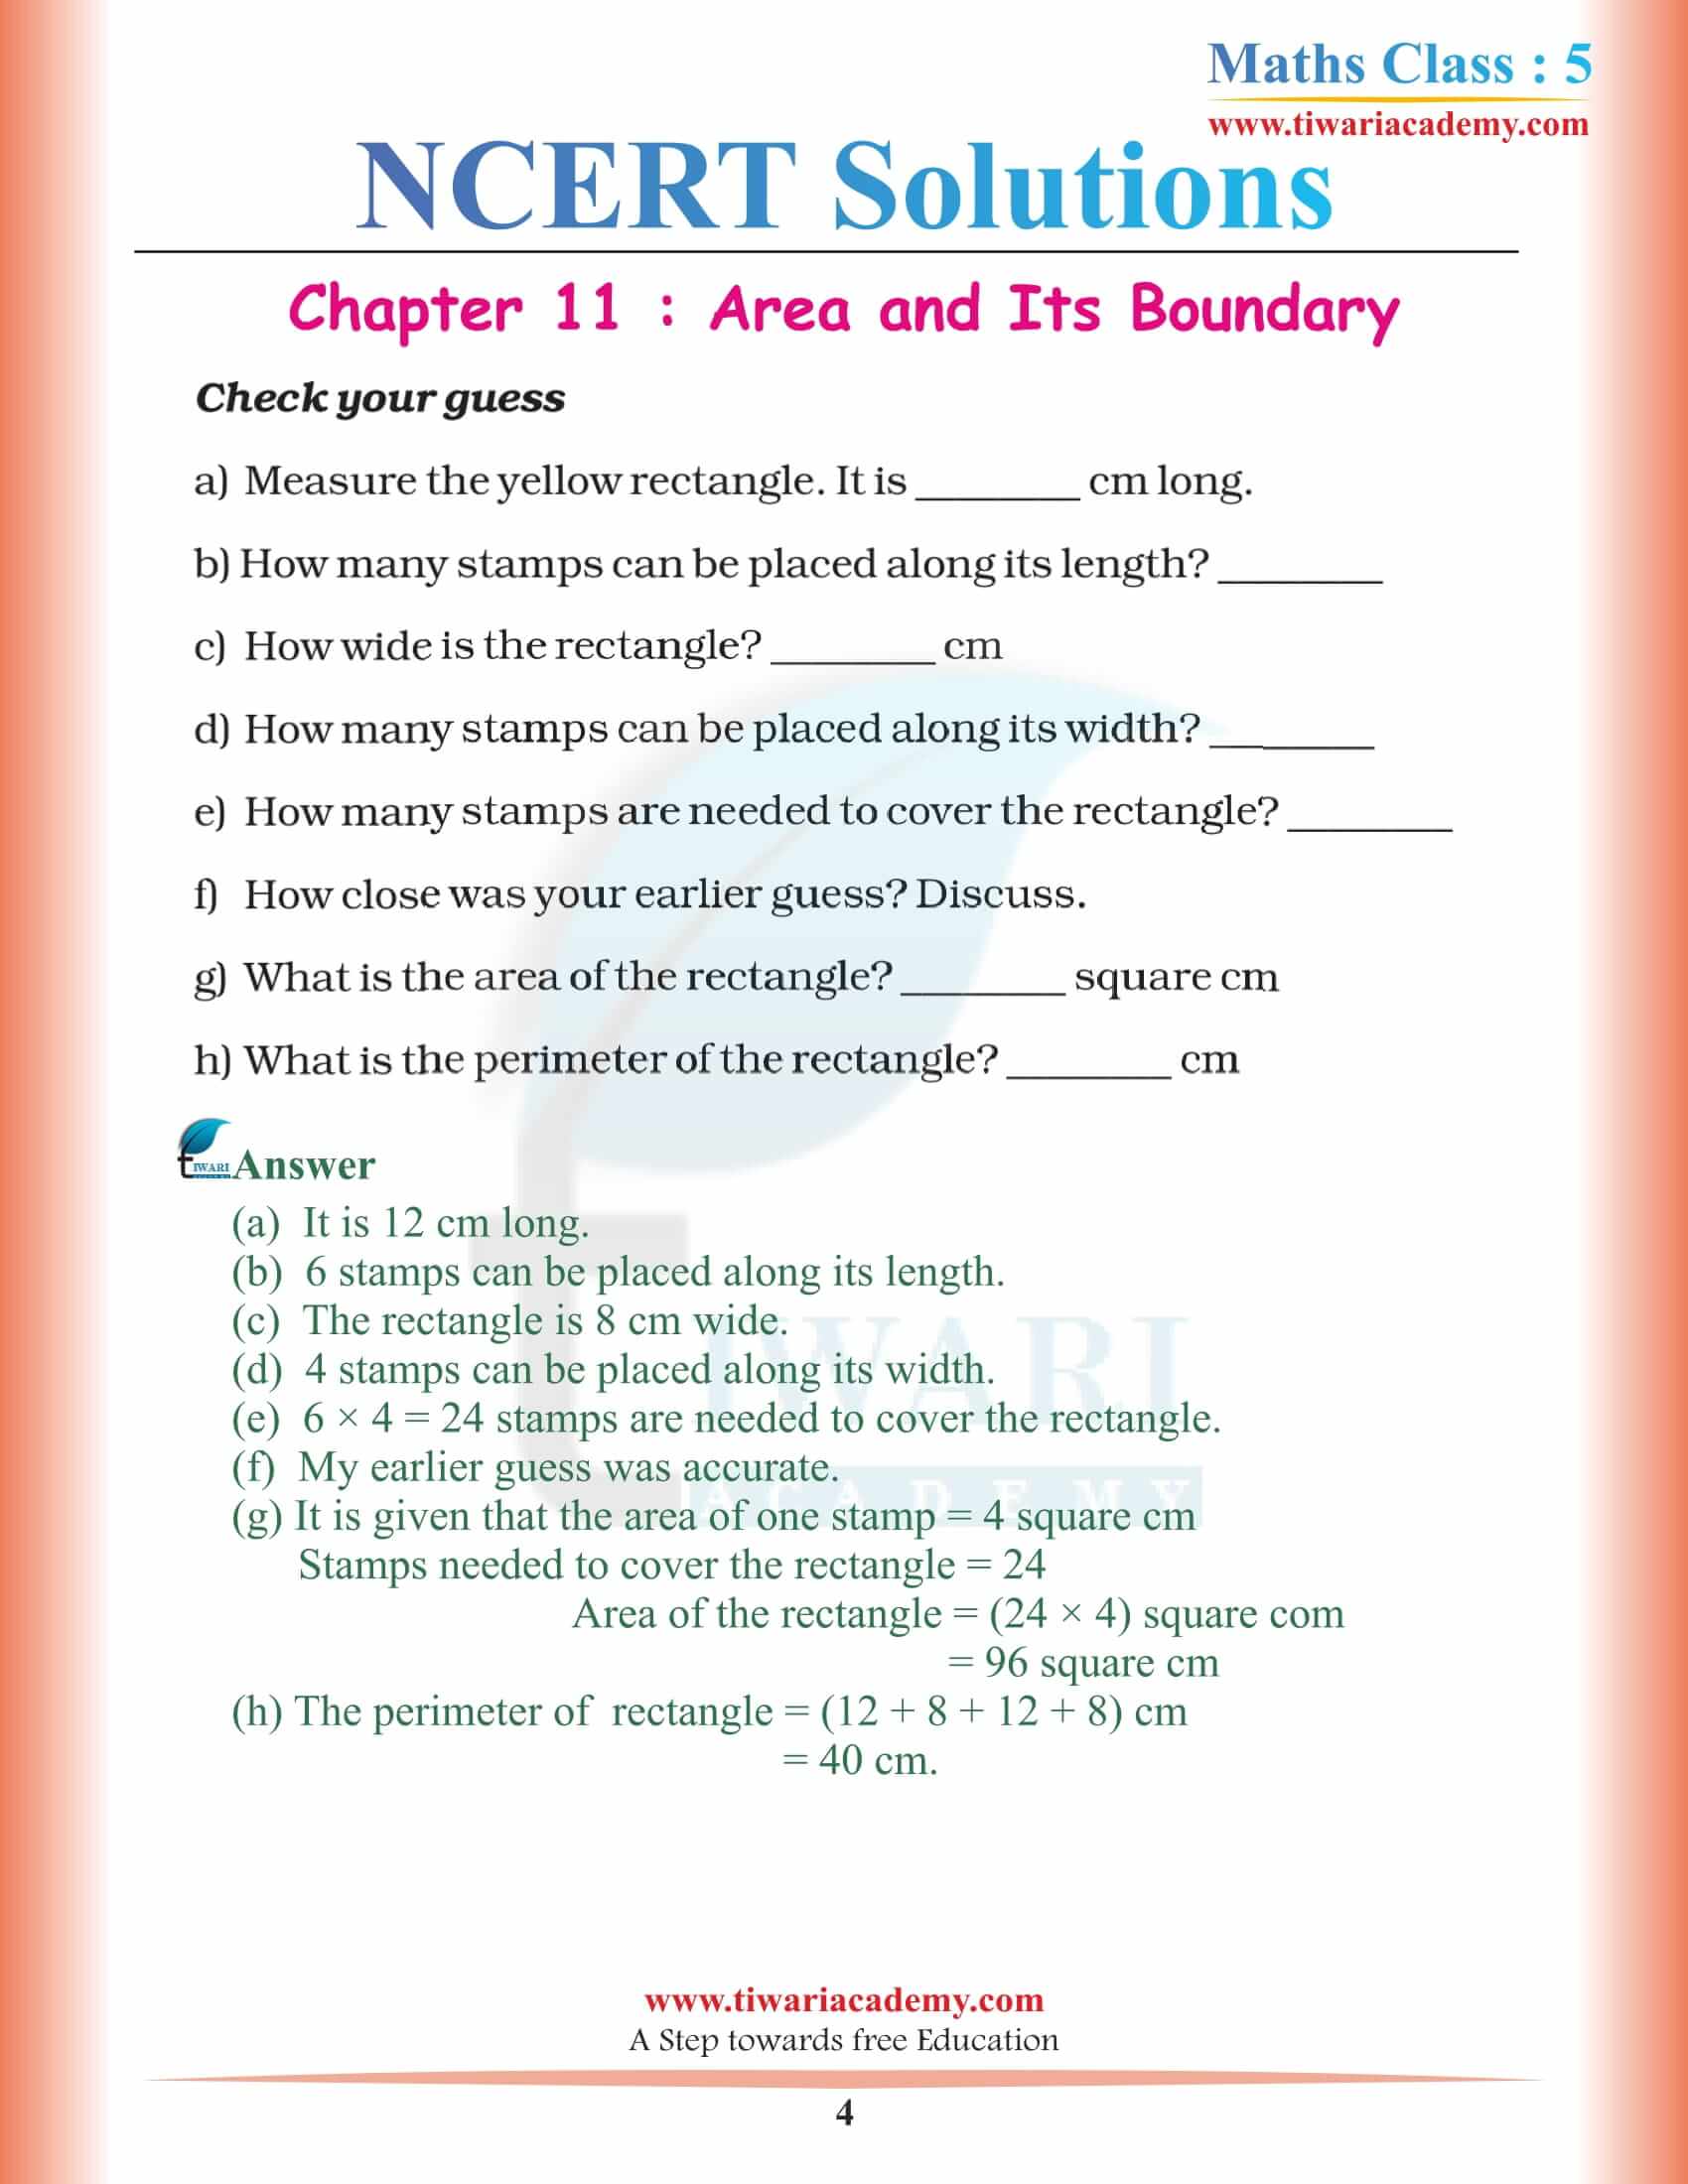 NCERT Solutions for Class 5 Maths Chapter 11 PDF file